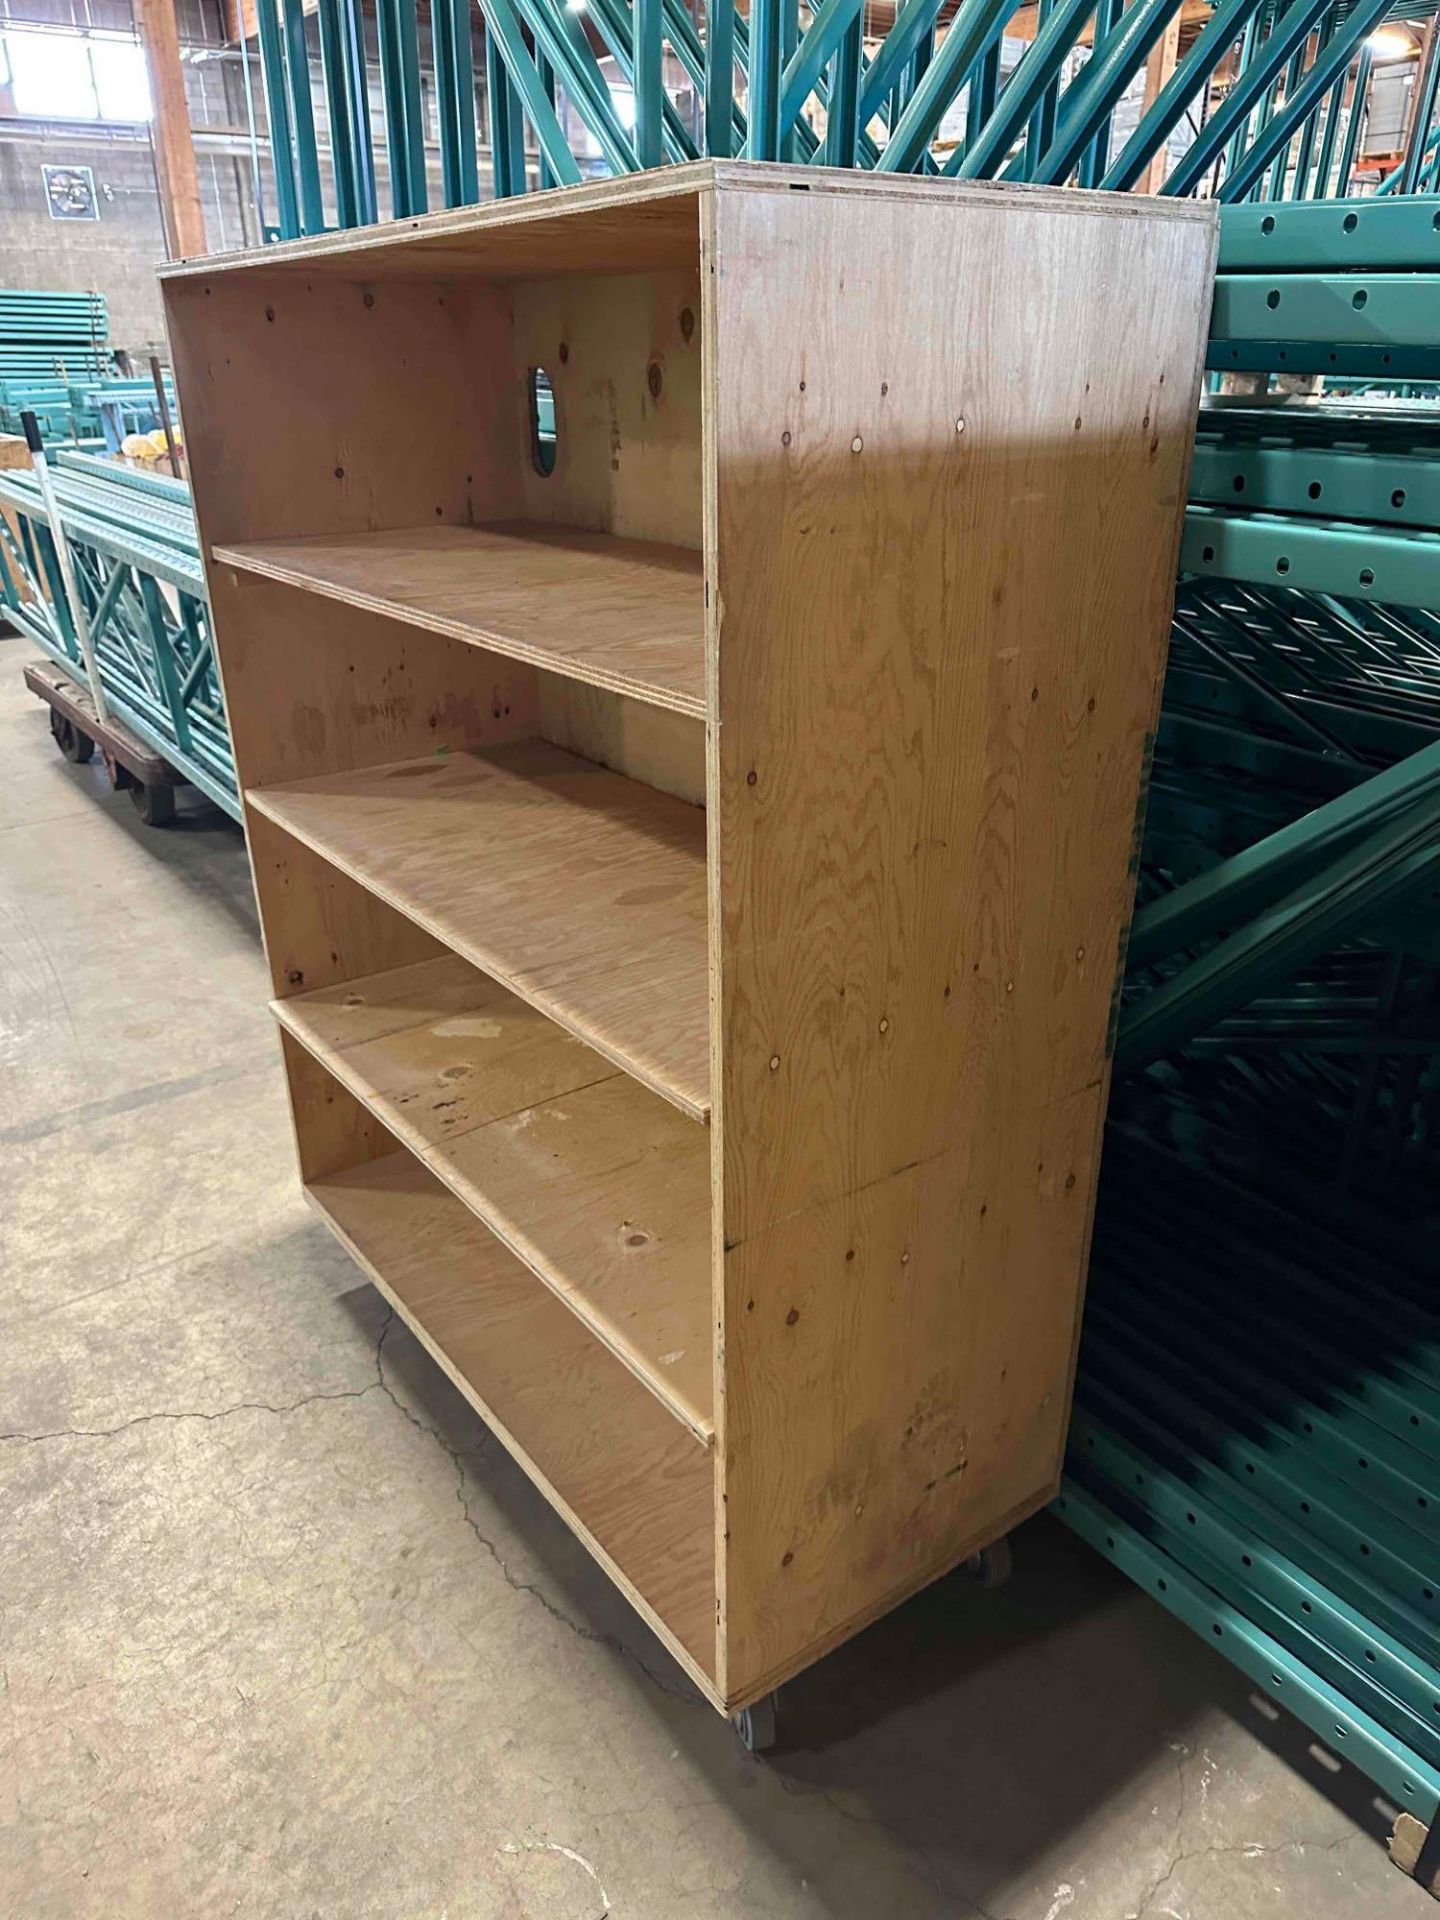 48” X 21” X 61” Mobile Wooden Shelf - Image 3 of 3